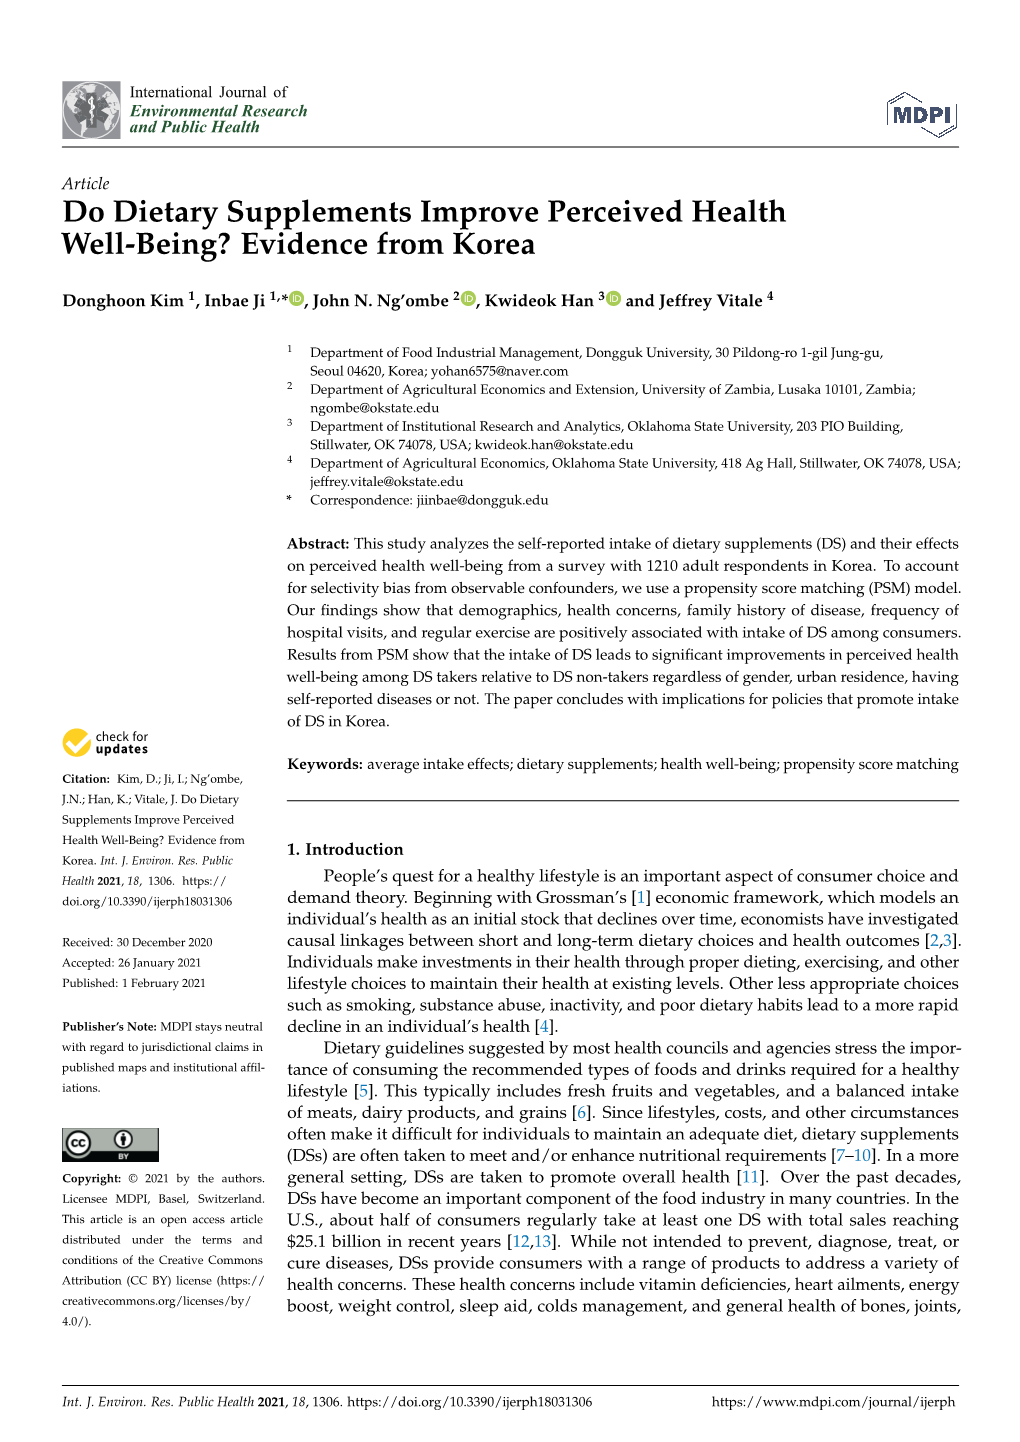 Do Dietary Supplements Improve Perceived Health Well-Being? Evidence from Korea